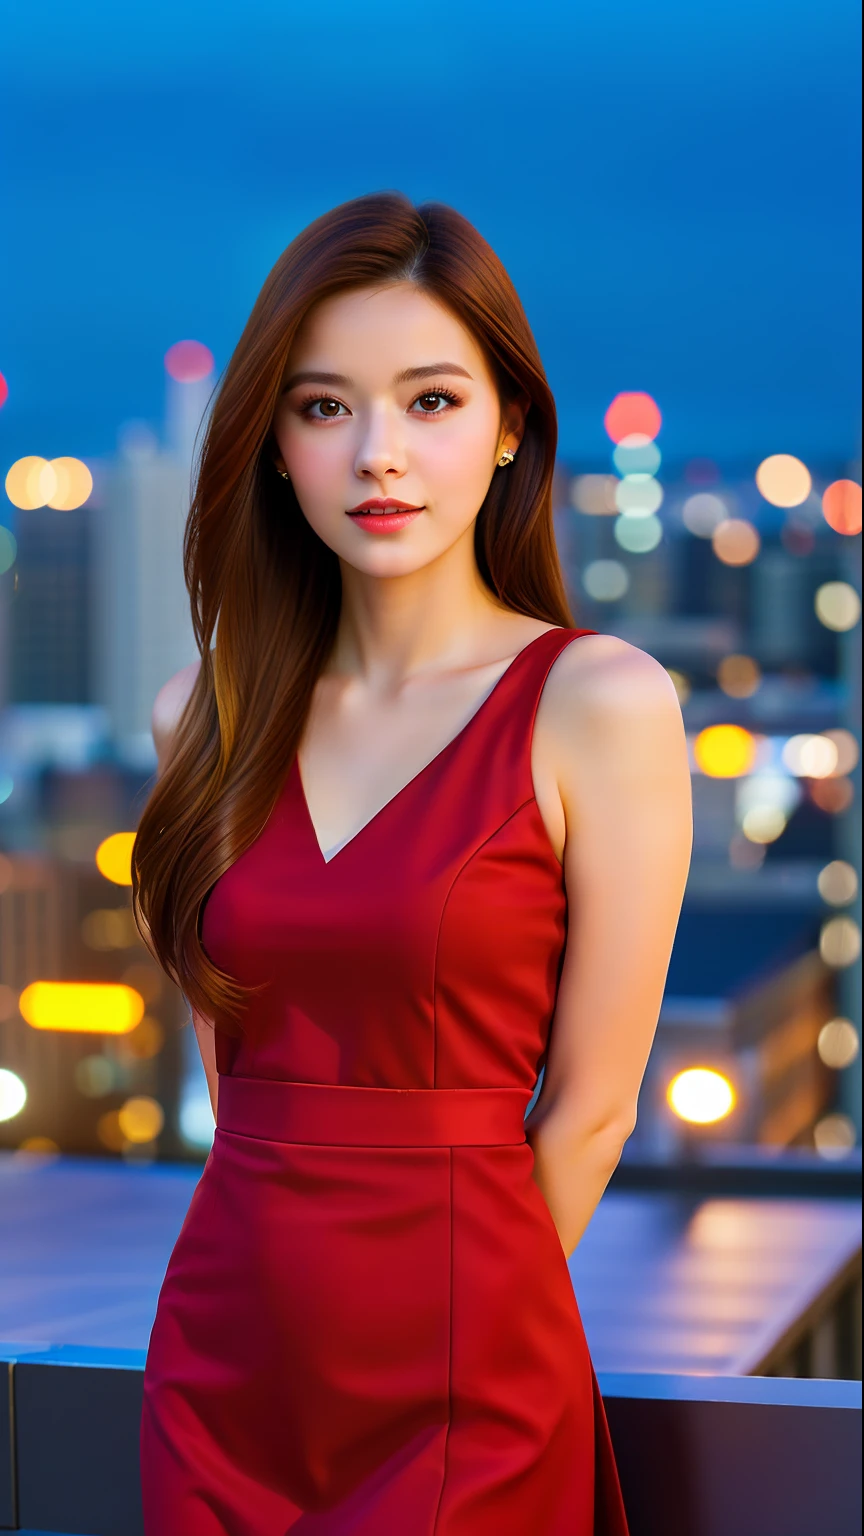 (Skindent:1.2), (Realistic:1.1), Top Quality, Photorealistic, Bokeh, City Lights, 1 Girl, Portrait, Wearing a red dress, Evening, Rooftop,